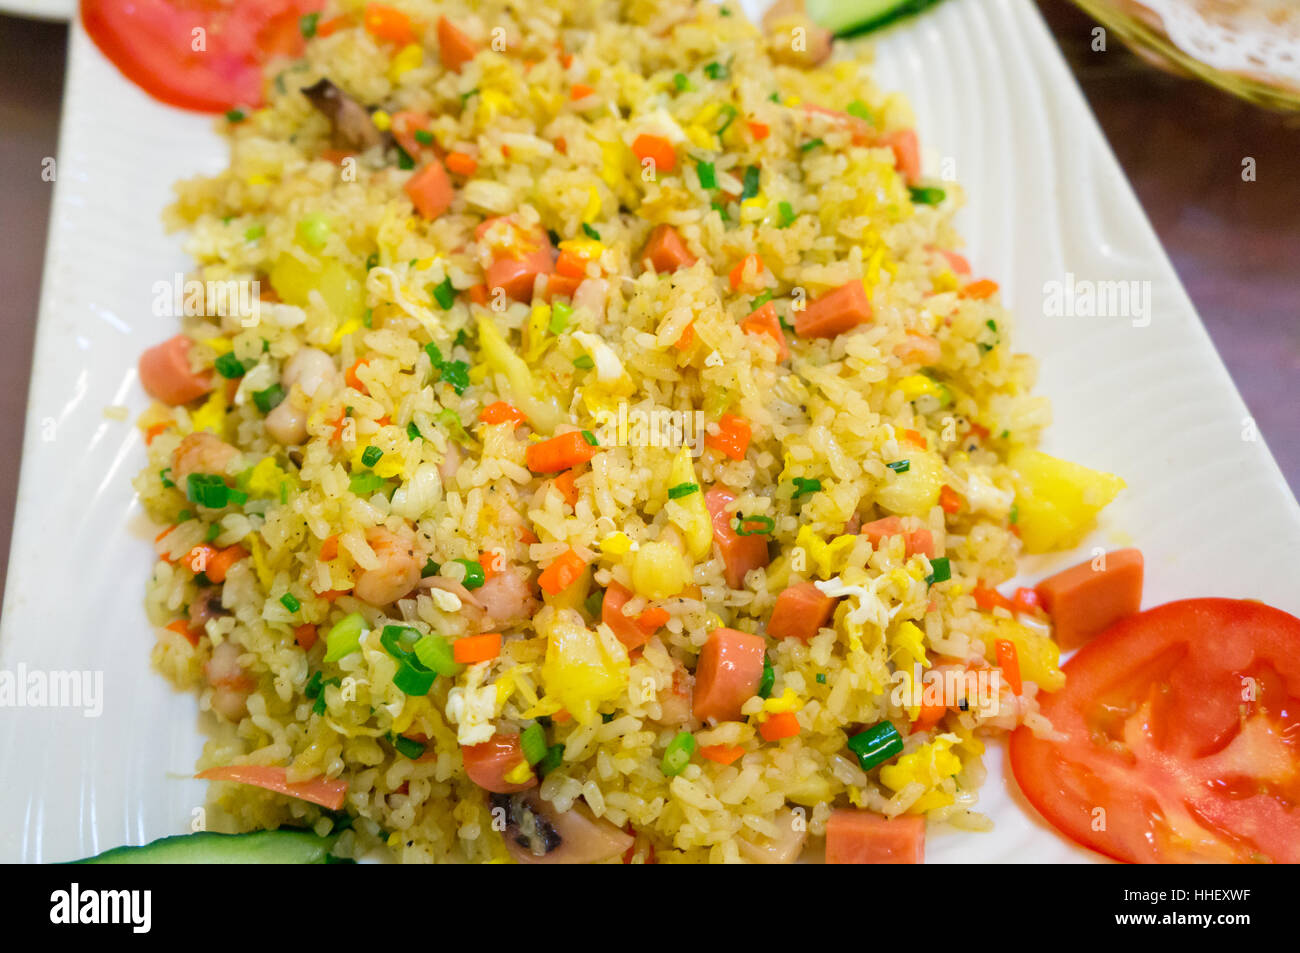 Fried rice with egg,carrot and green bean on the plate Stock Photo